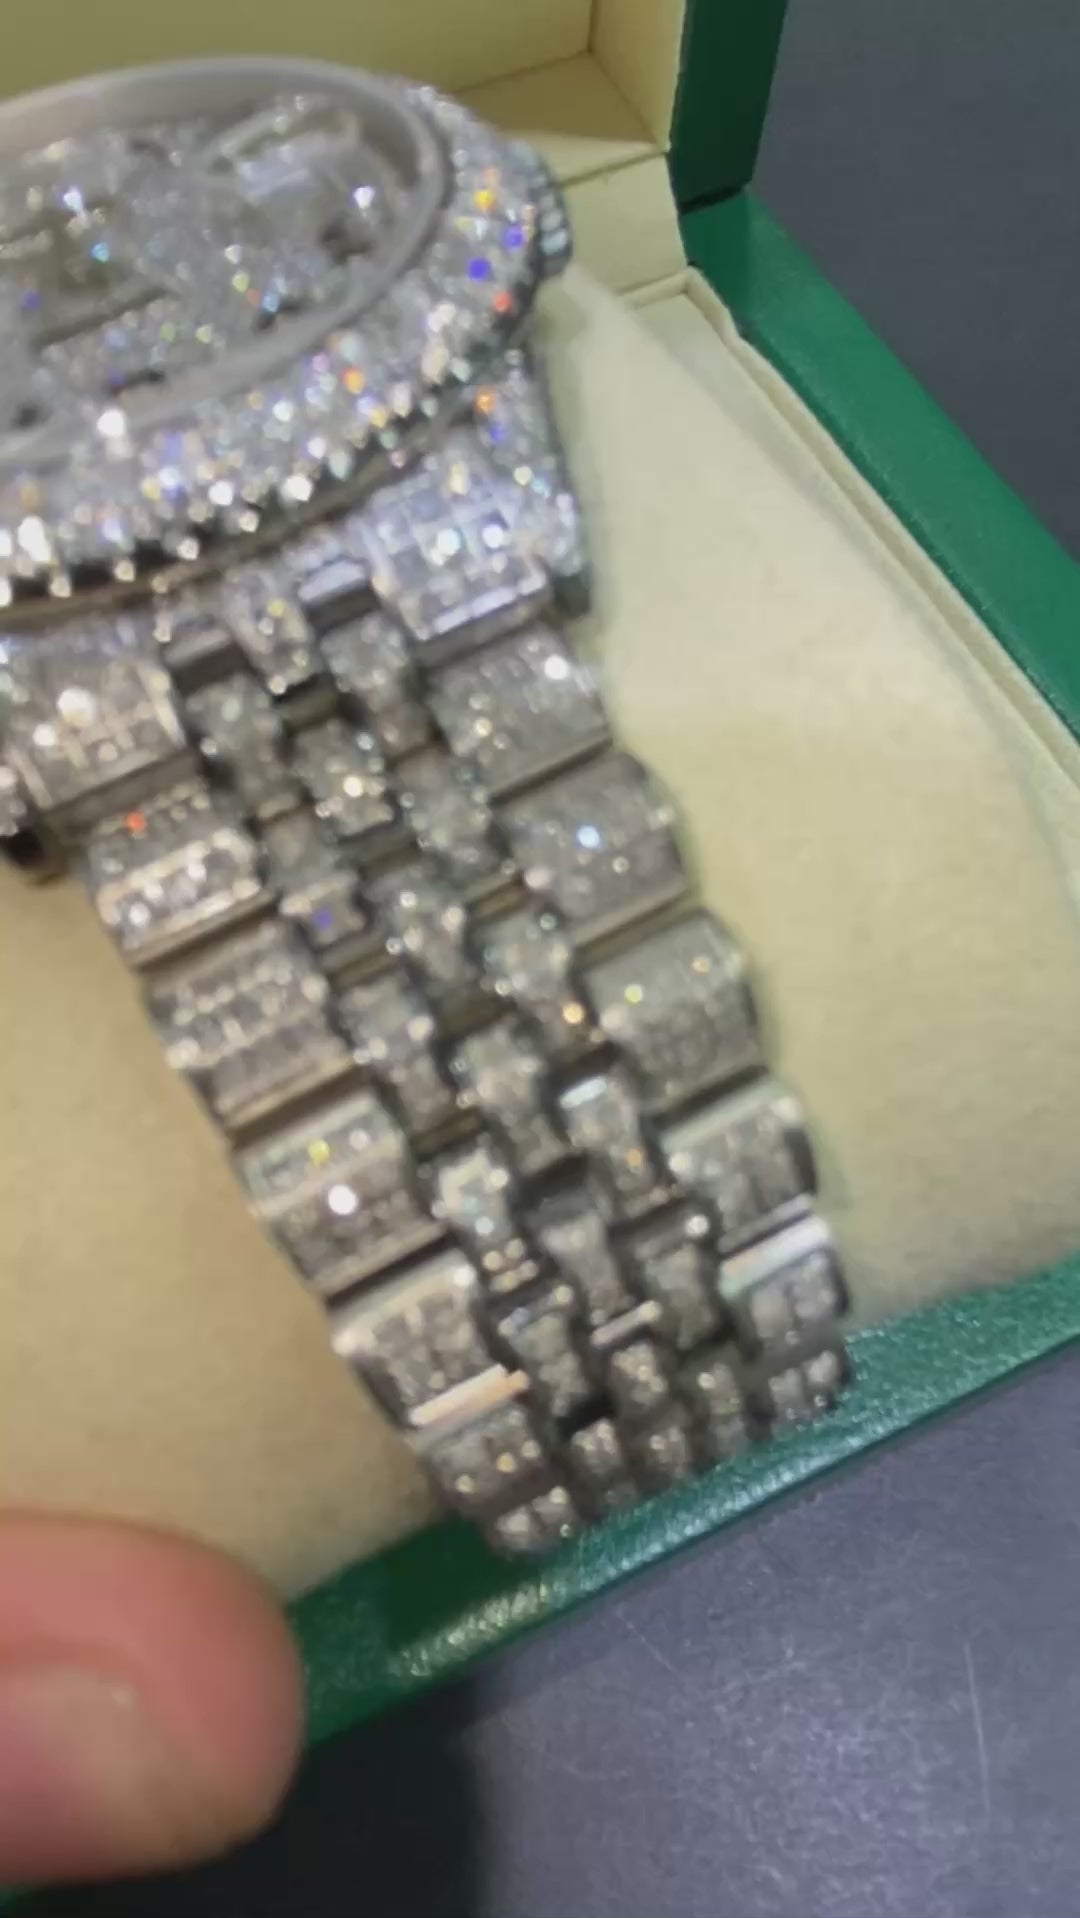 36mm rolex stainless steel#1601 double bezel “iced bustdown “ vs1 natural diamonds 💎 15cts.t.w. video